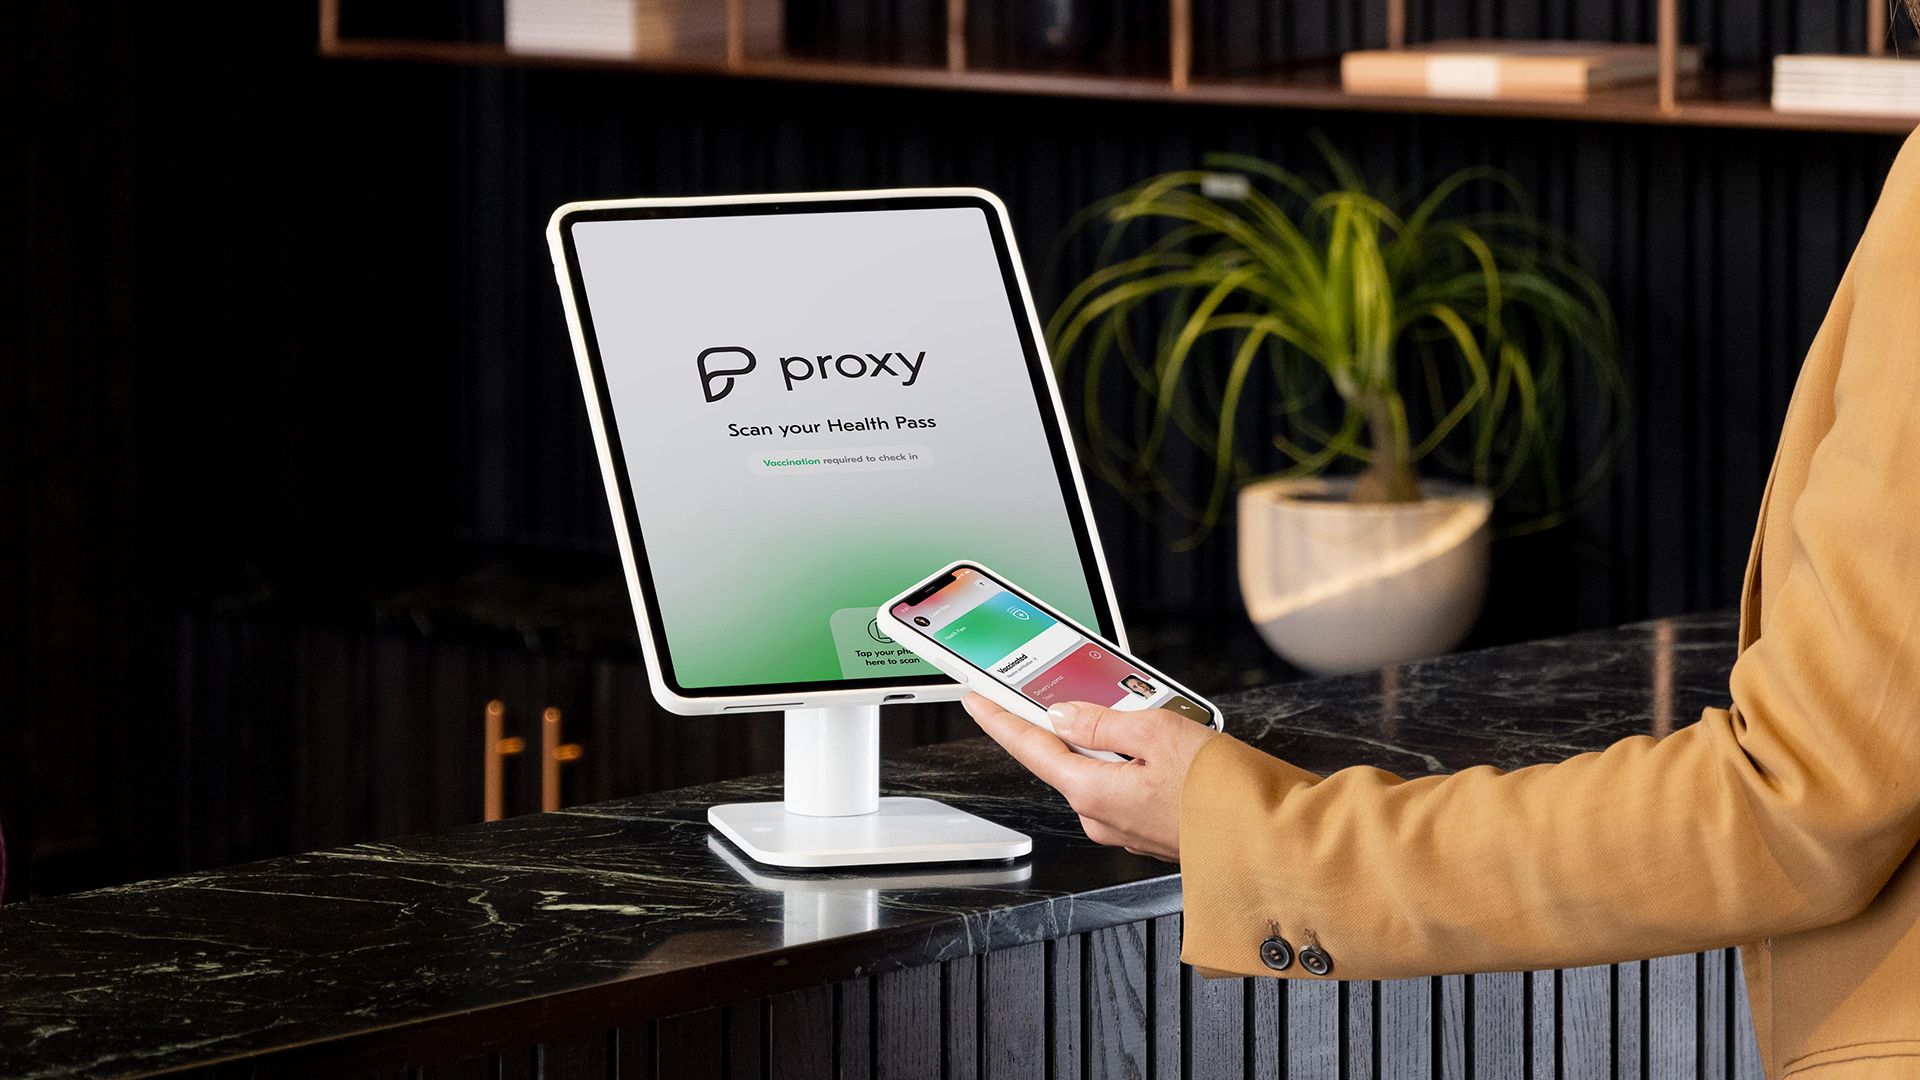 A photo of the Proxy Health app